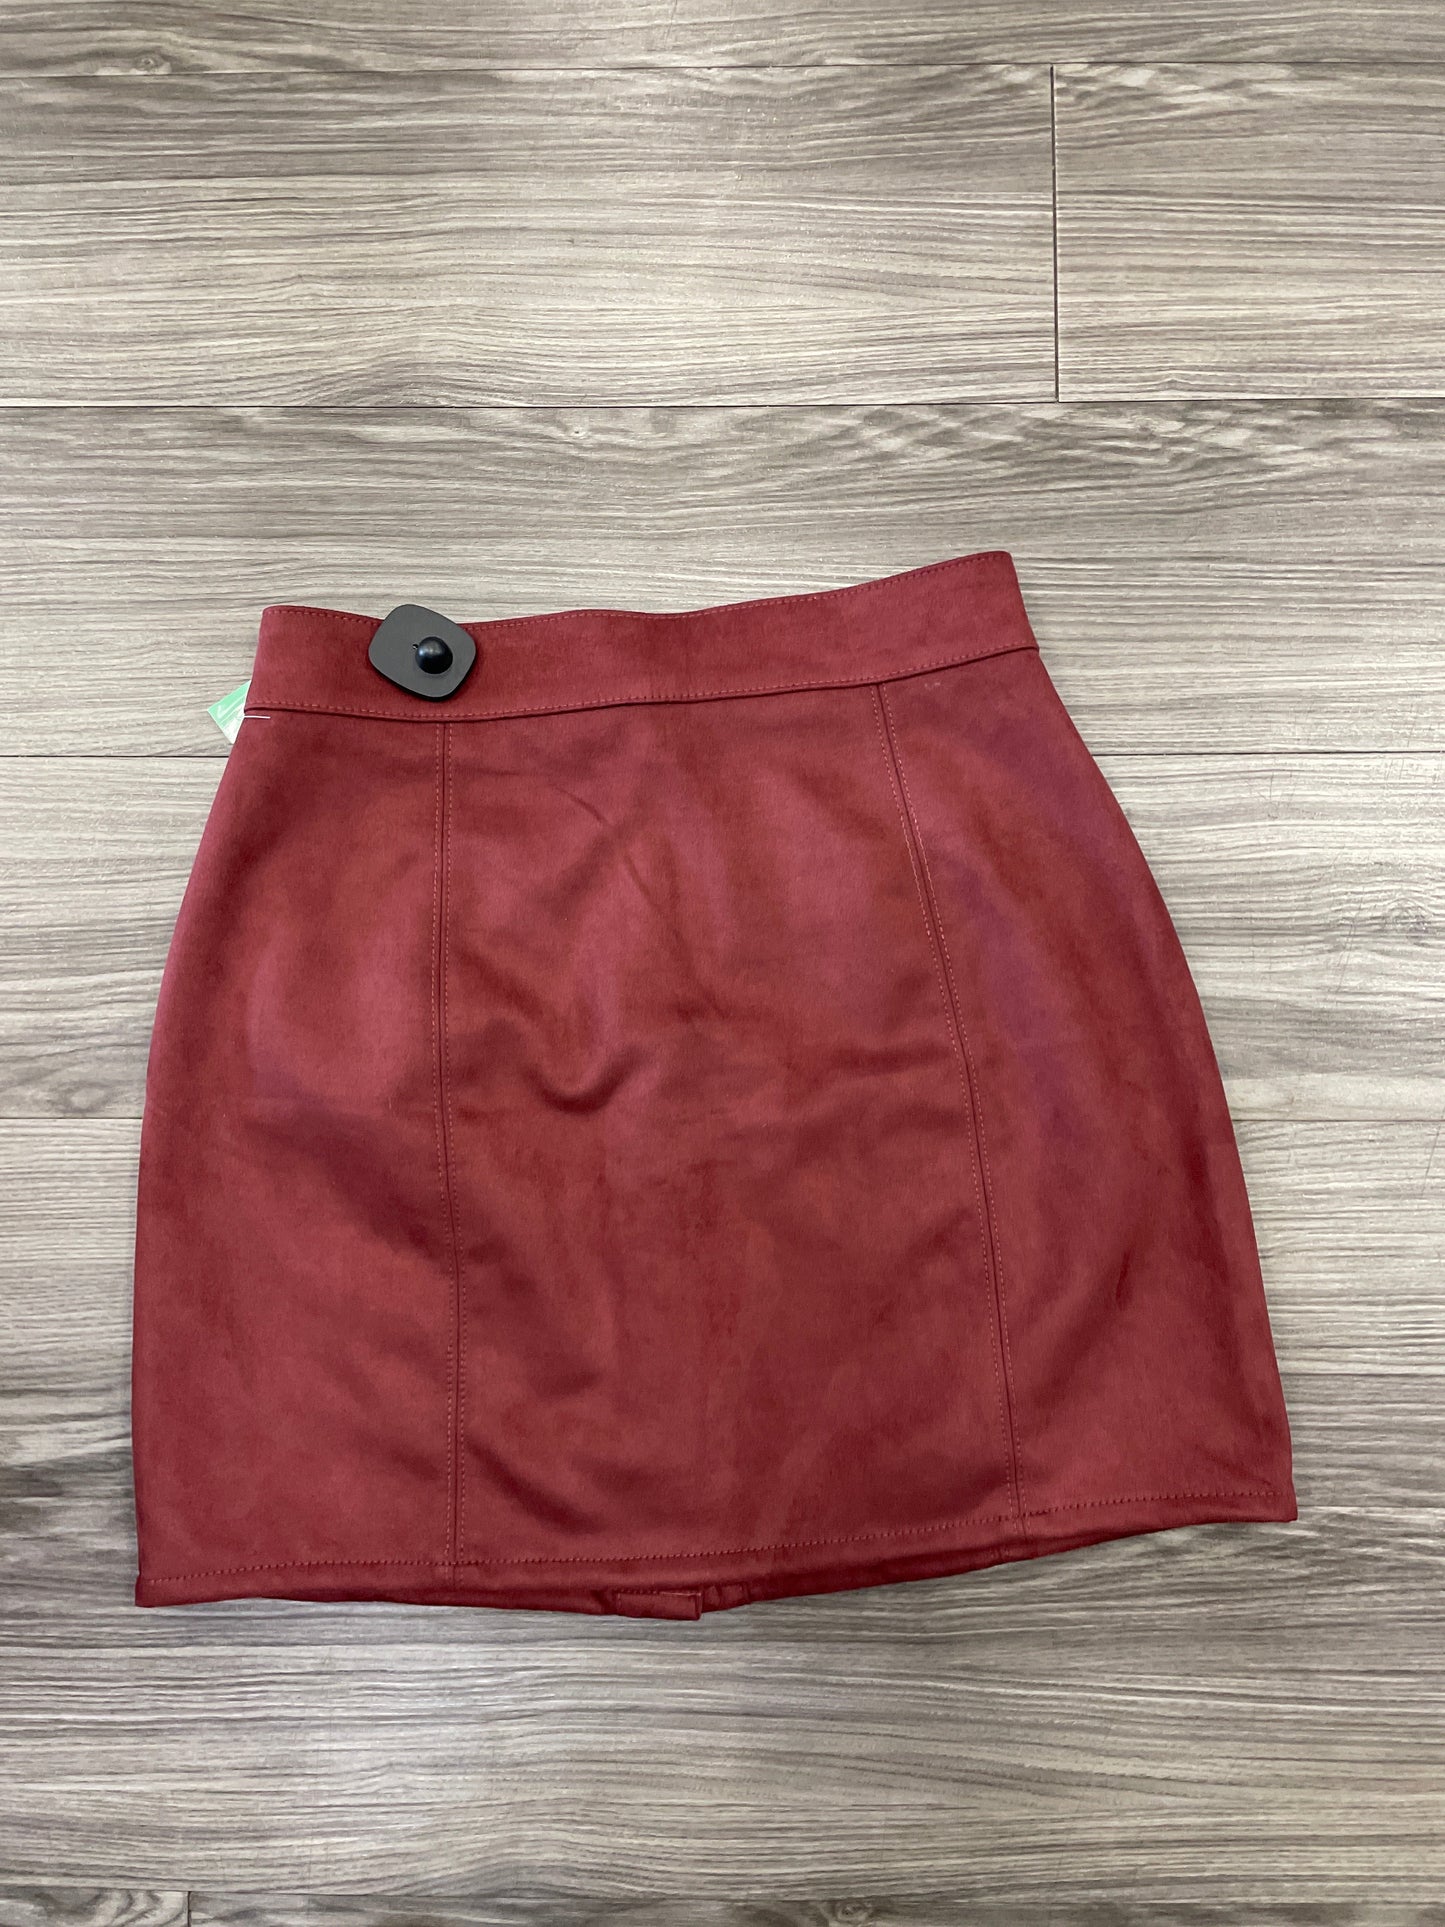 Red Skirt Mini & Short Maurices, Size 8